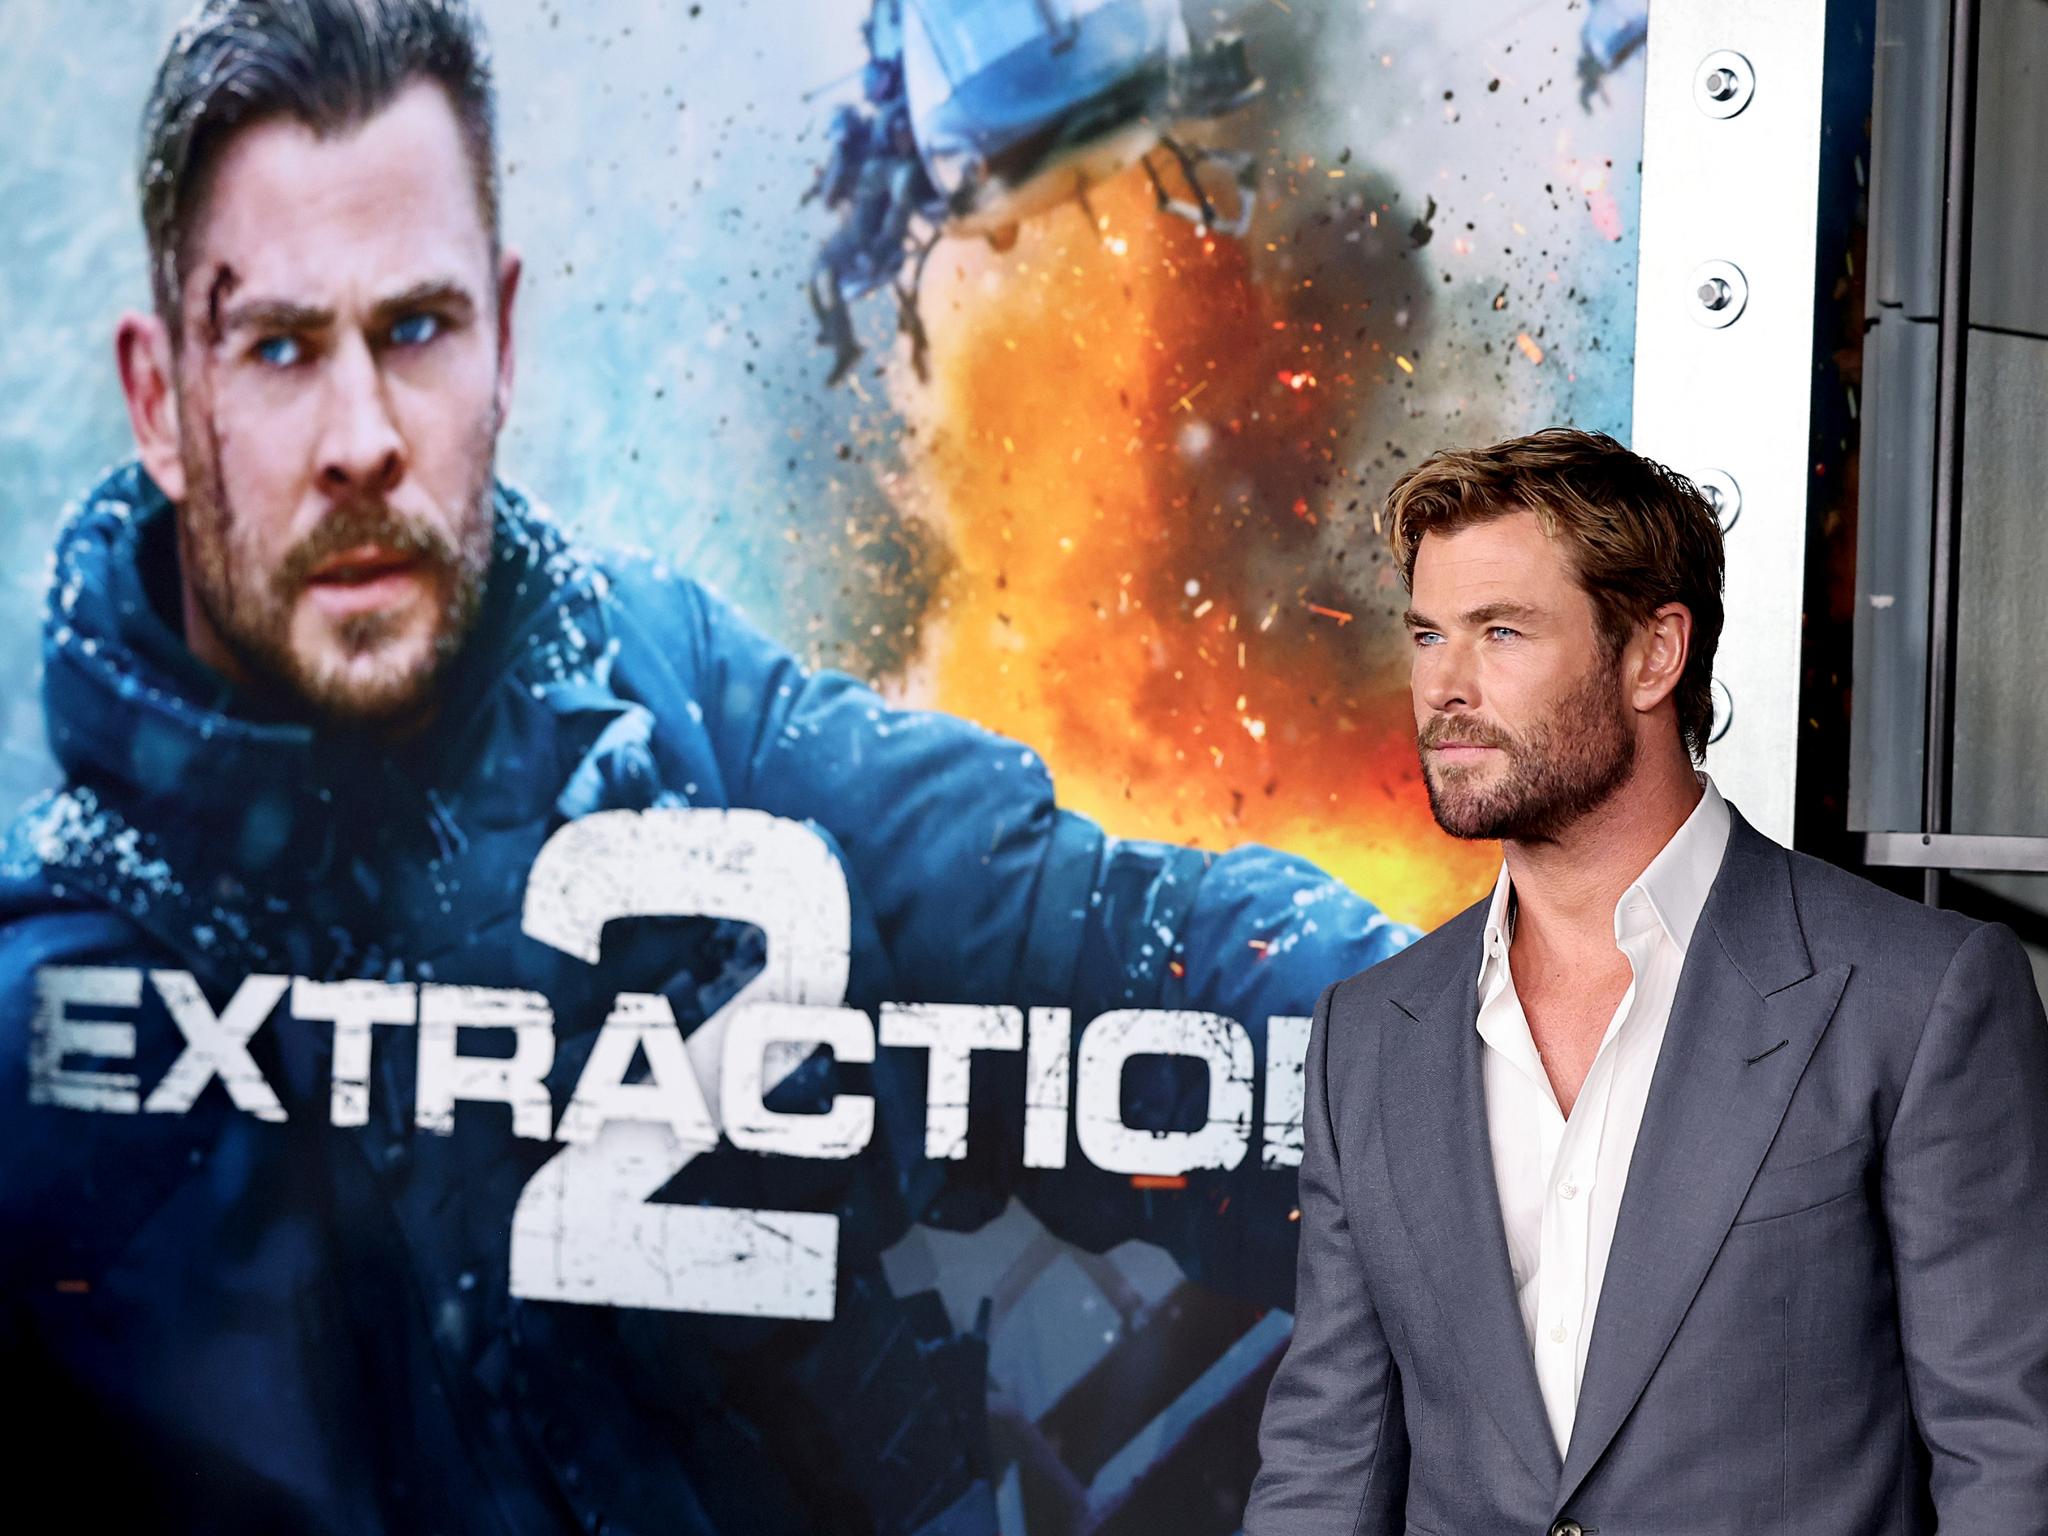 Extraction 2 Trailer: Check Out the Cast of the New Chris